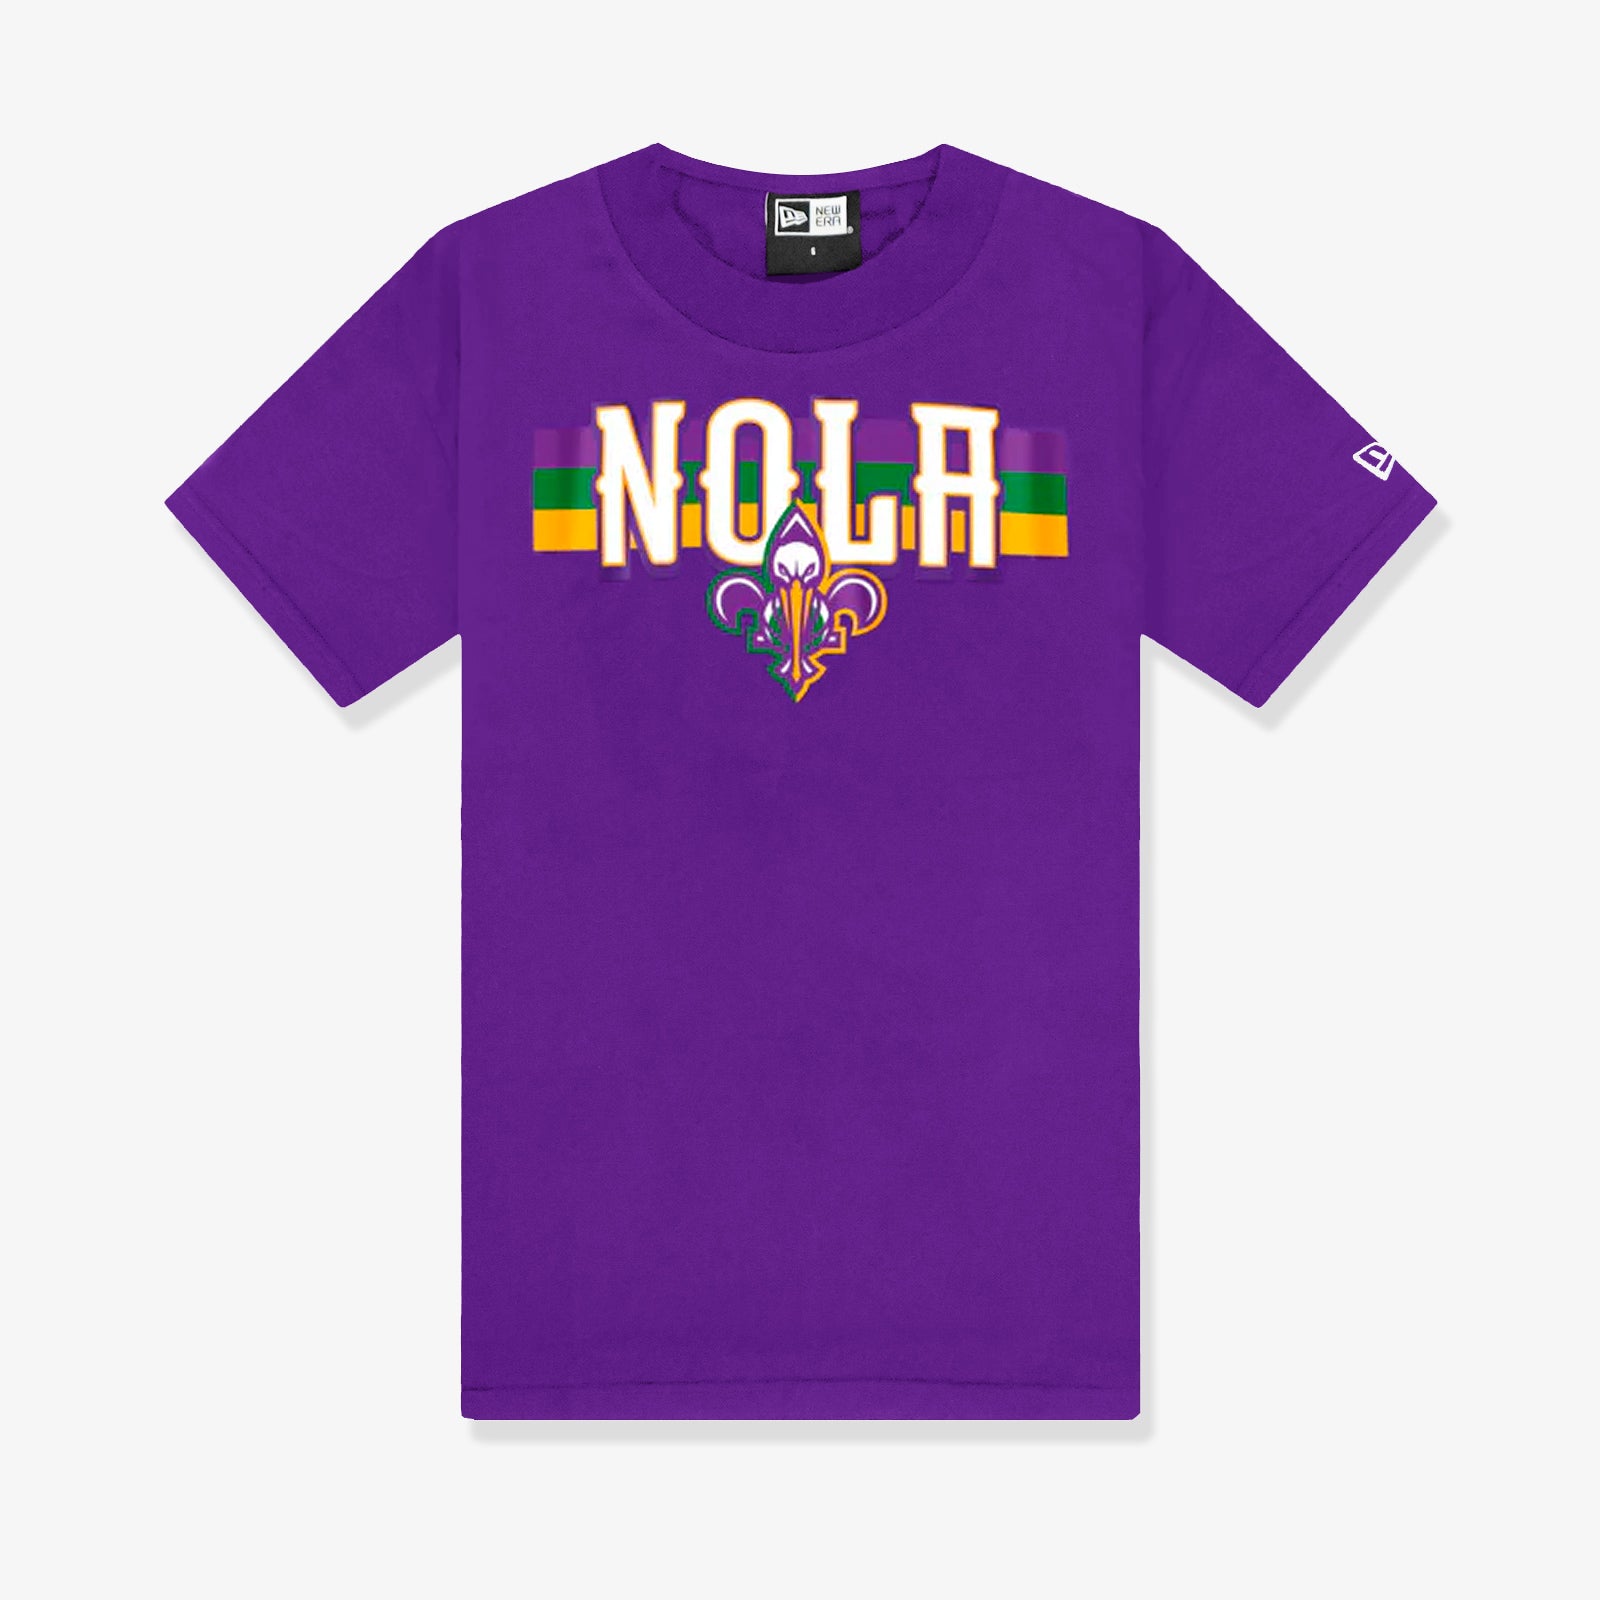 New Orleans Pelicans on X: Our City edition Mardi Gras gear is on